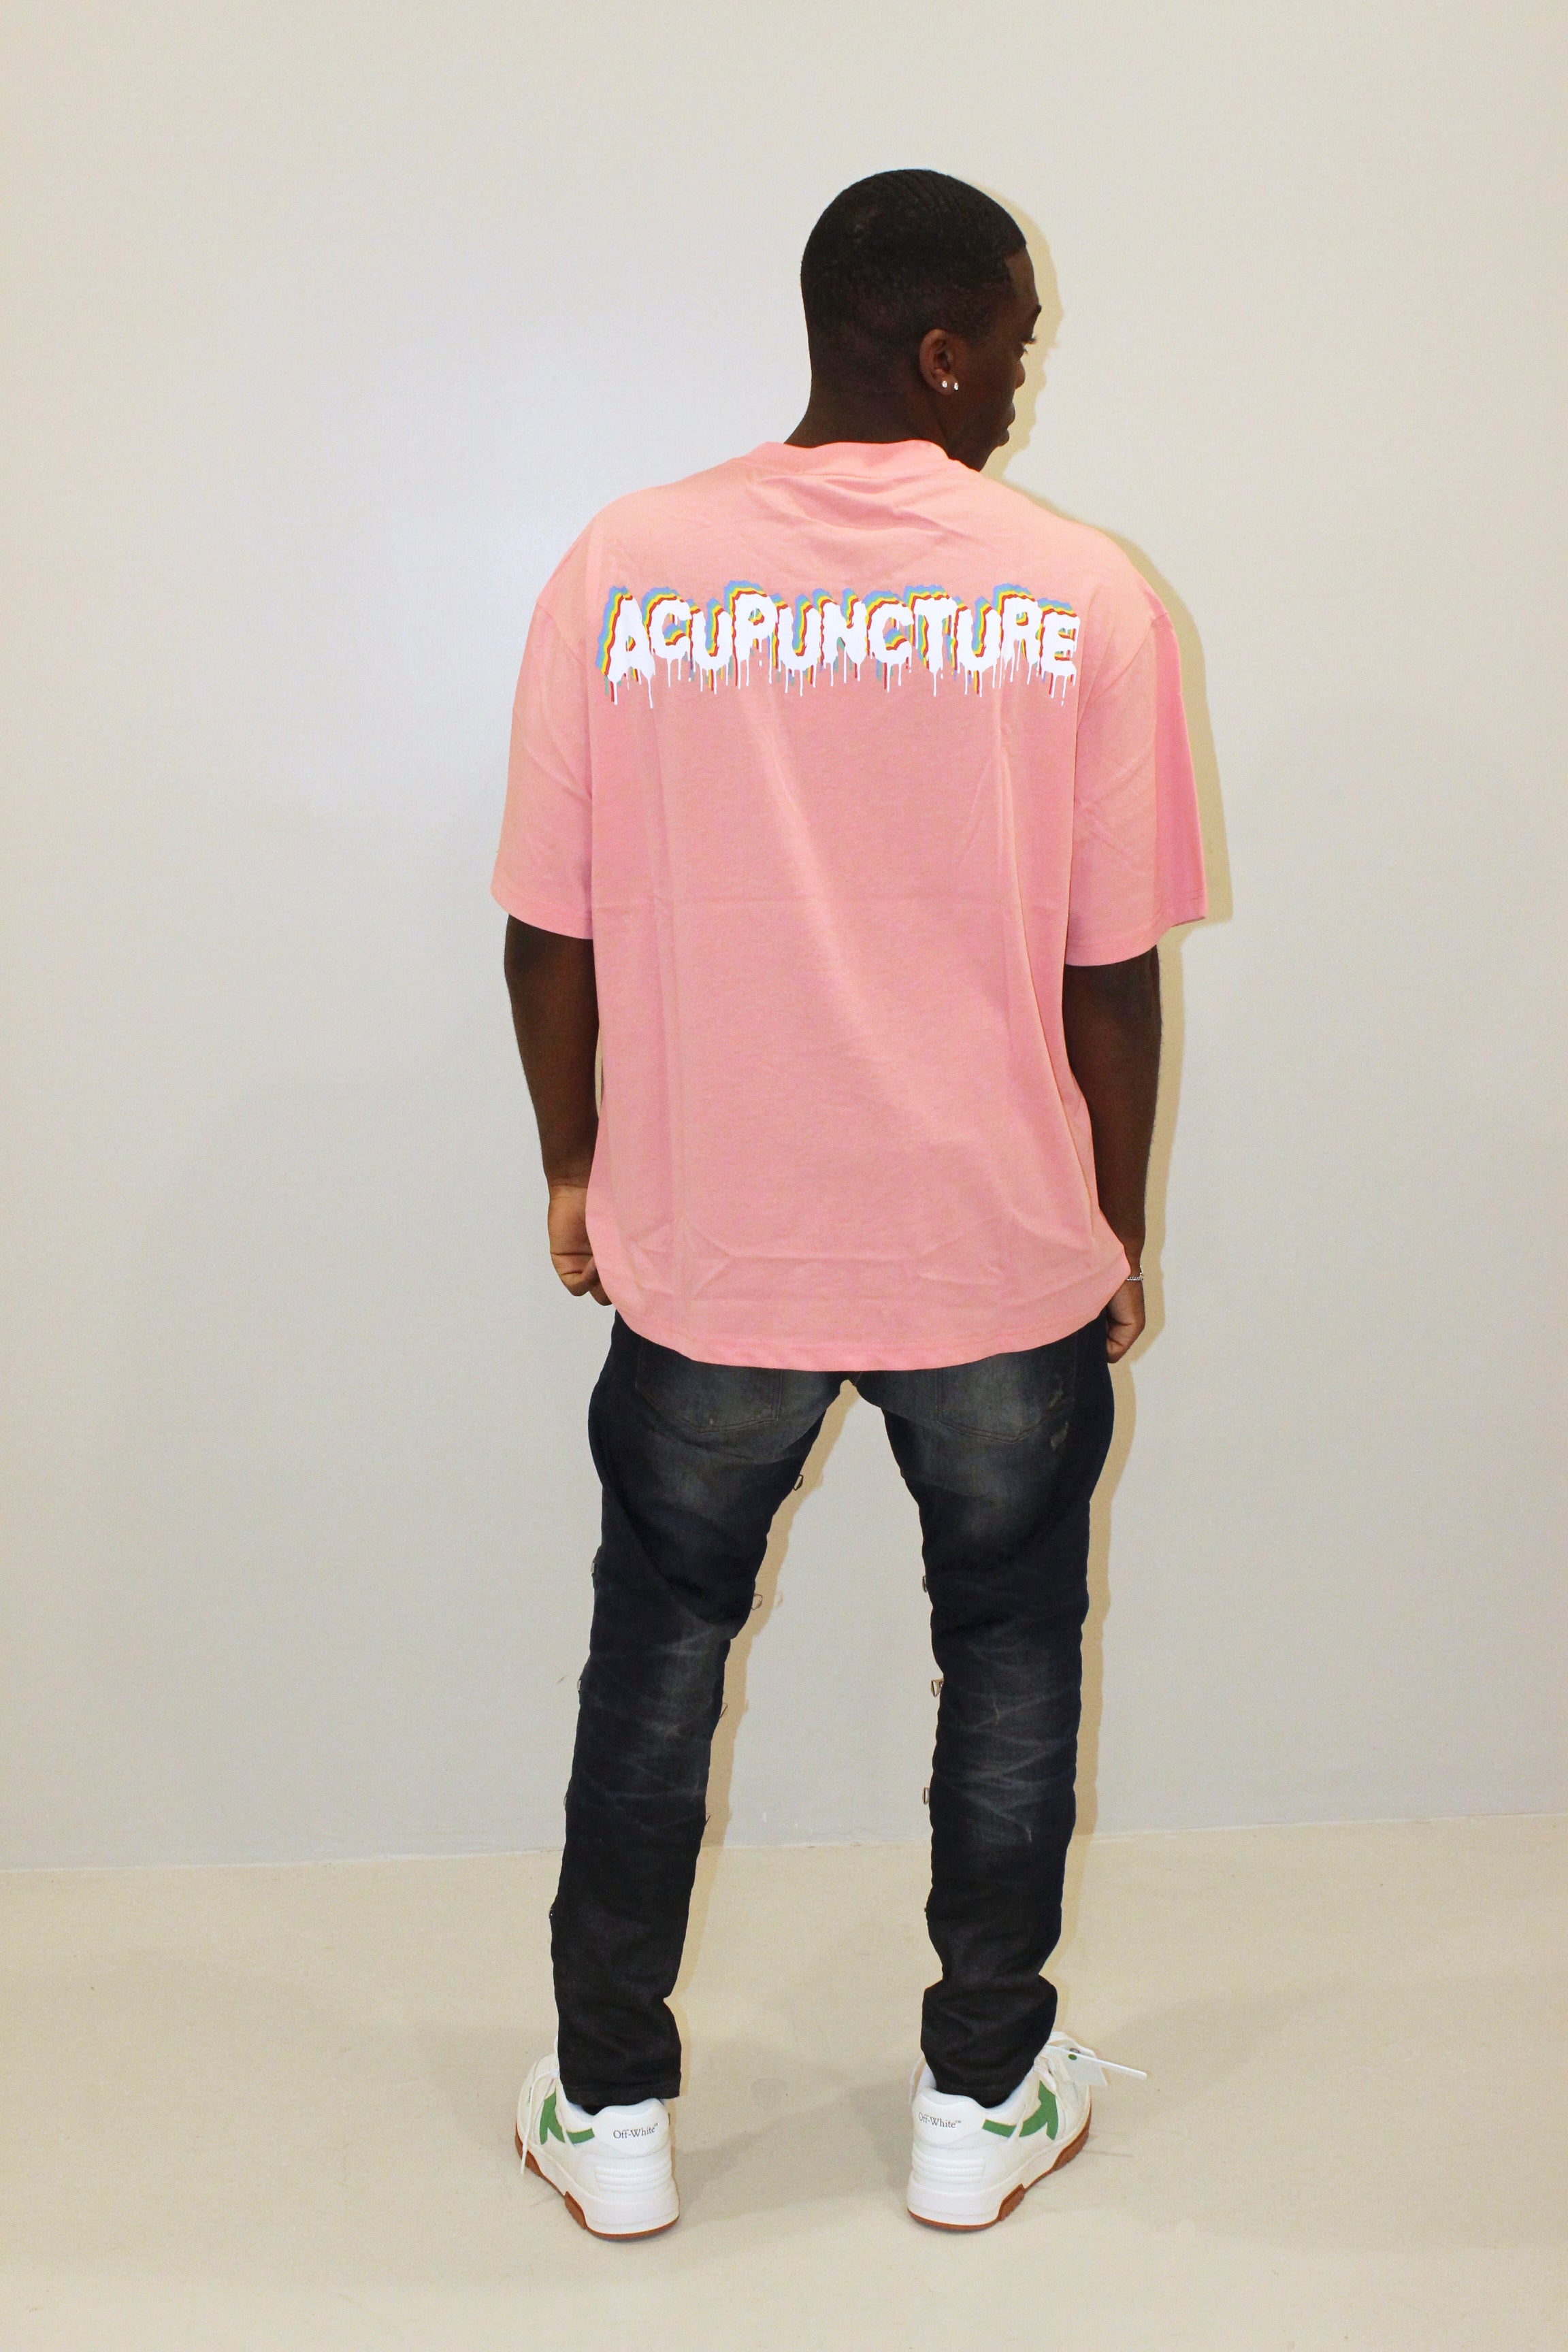 T-shirt acupuncture